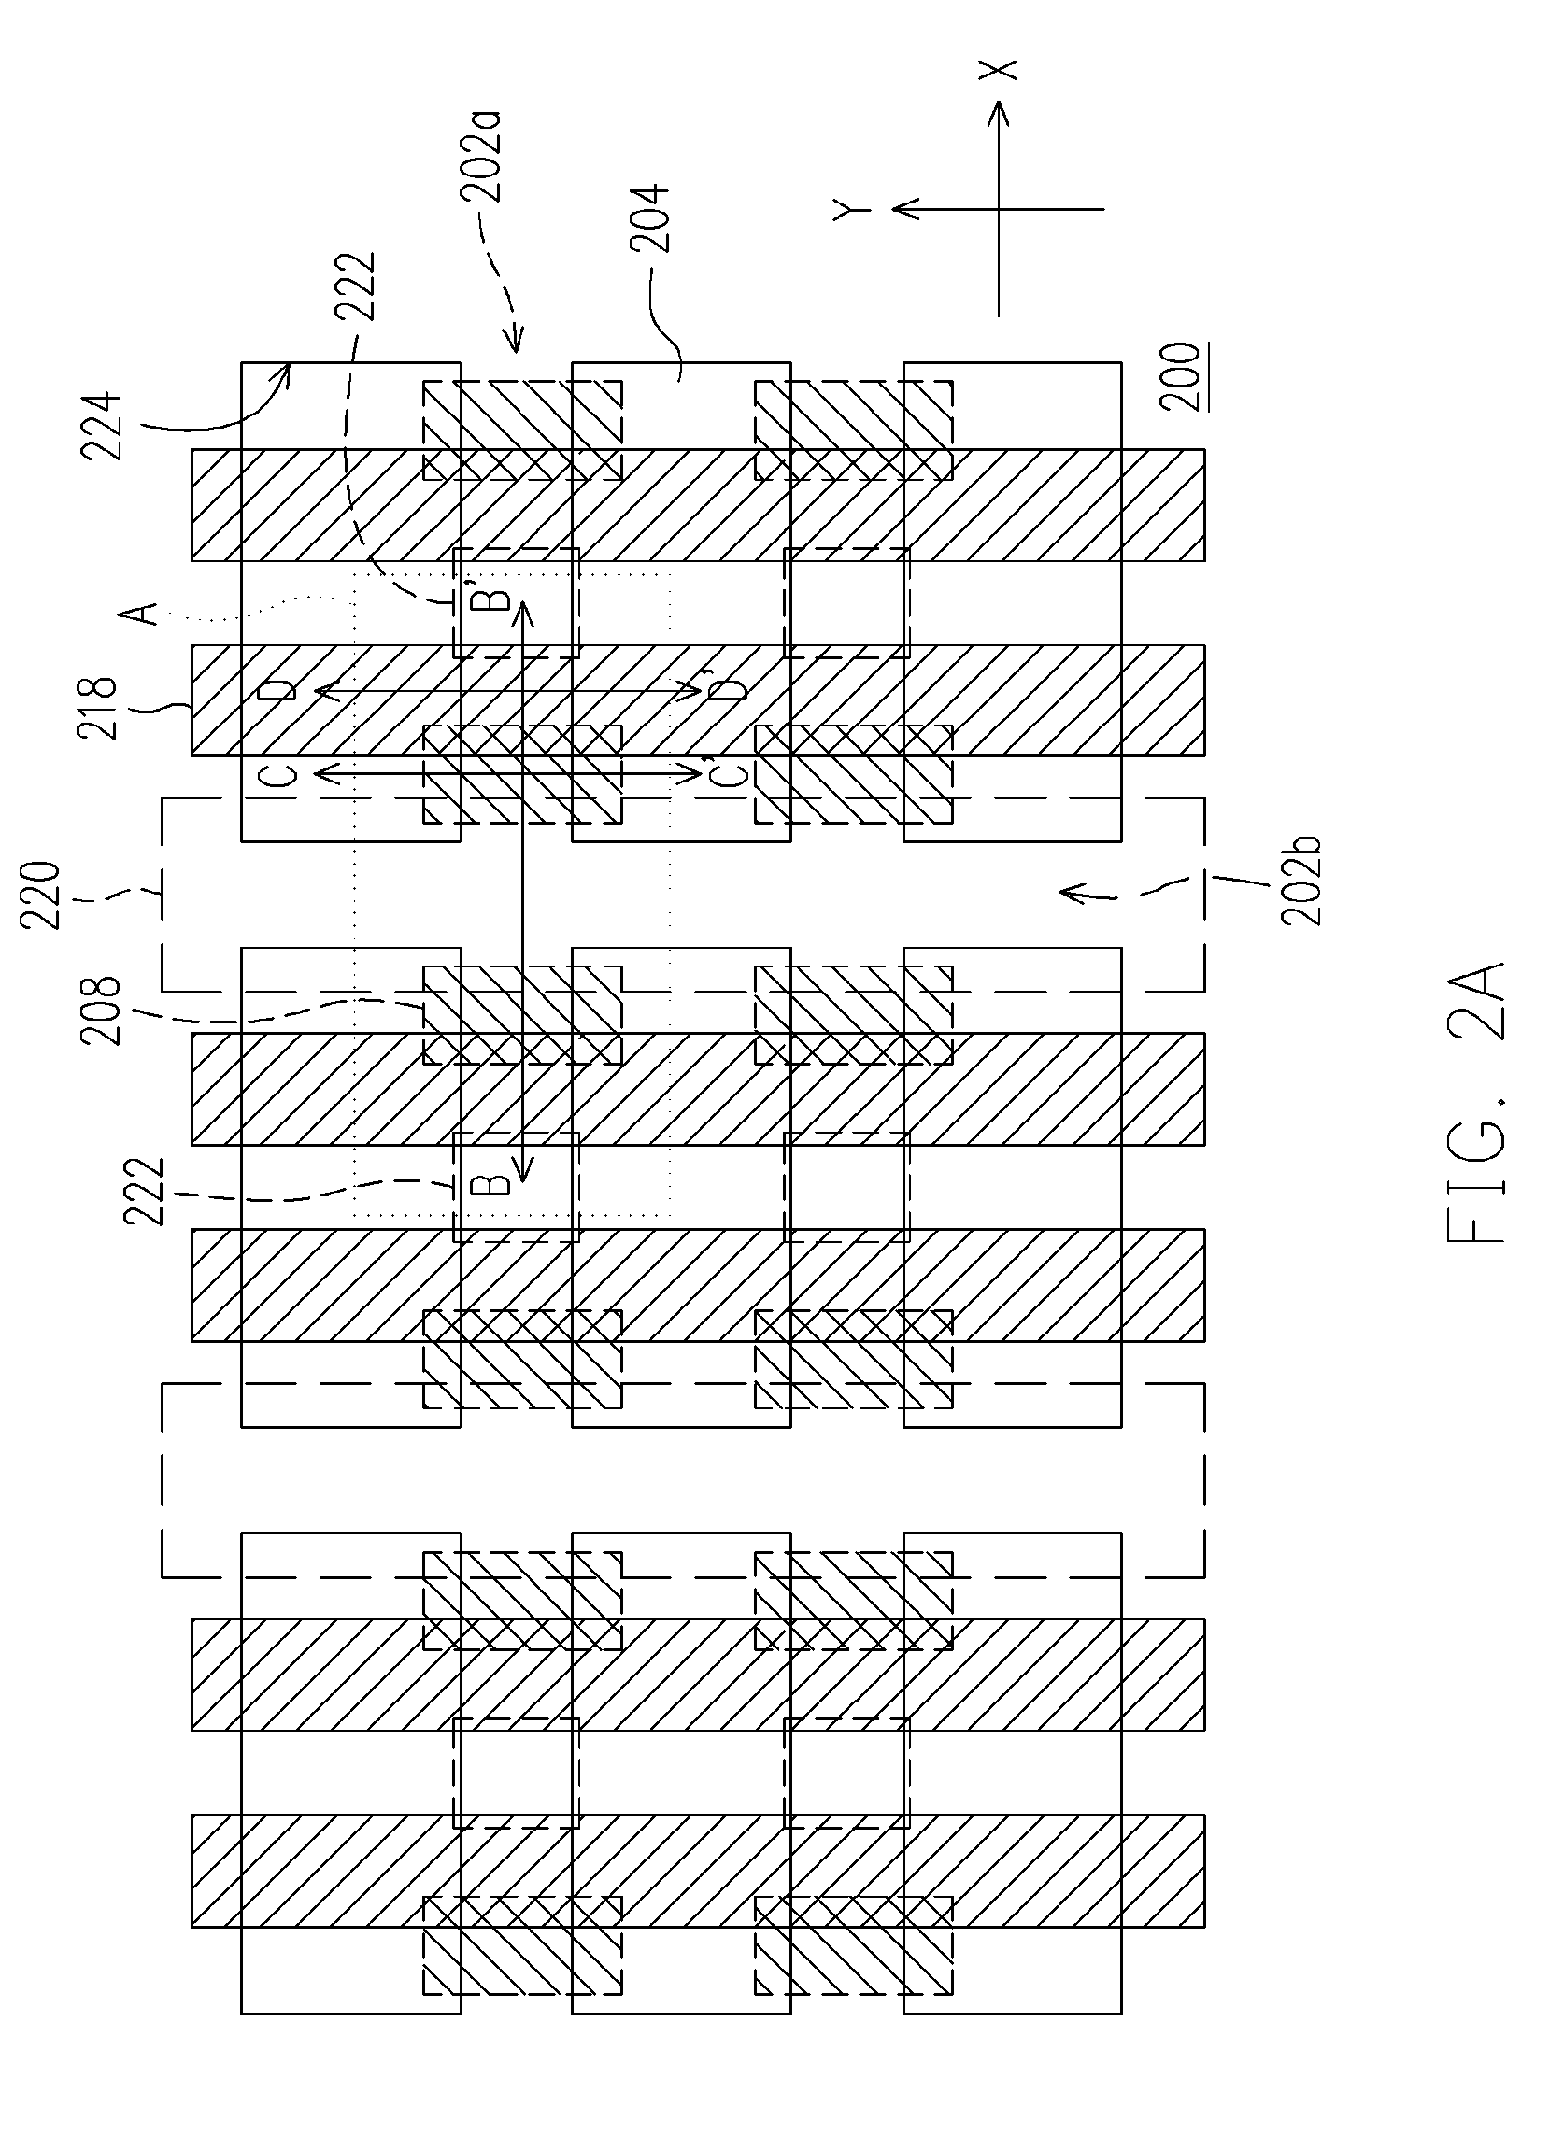 Split gate flash memory and manufacturing method thereof